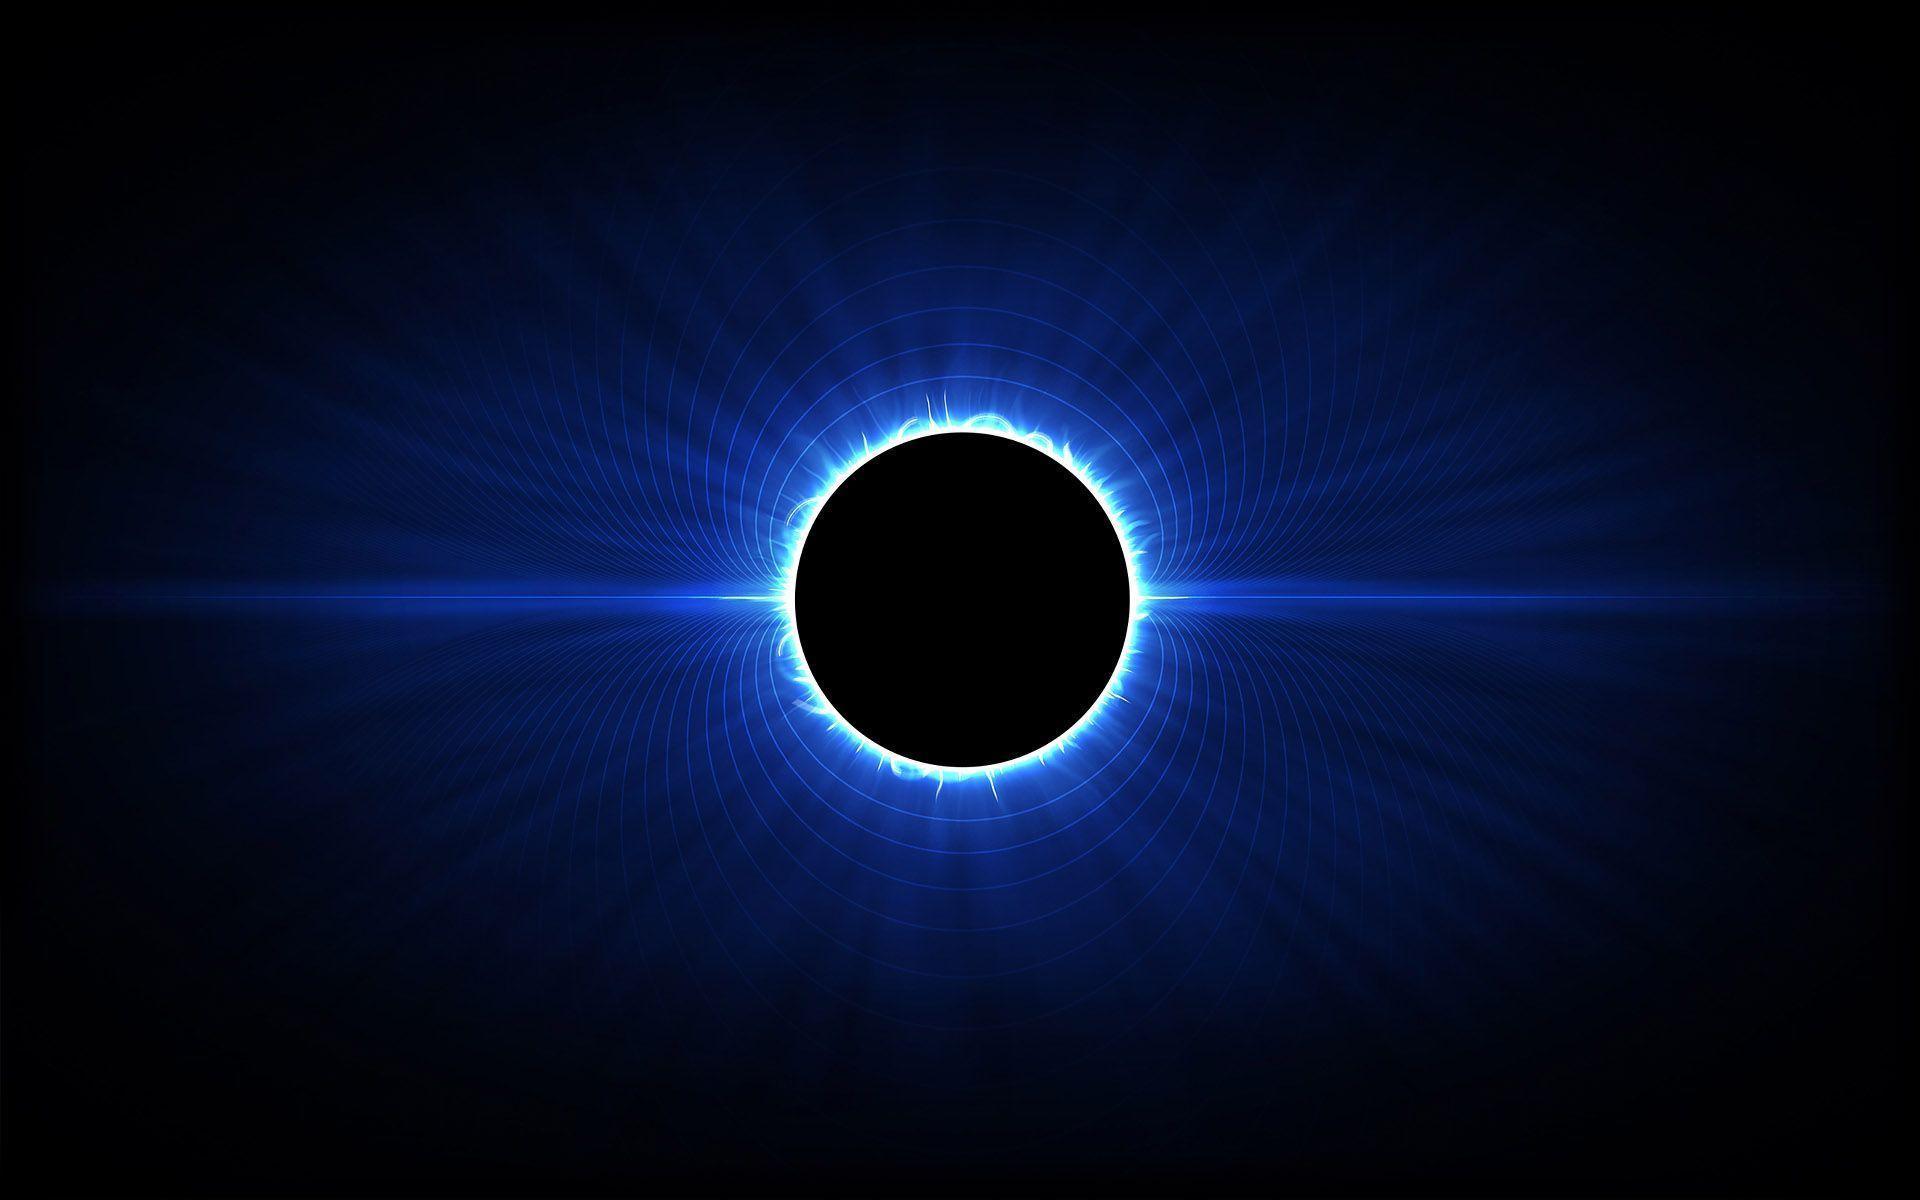 Solar eclipse wallpaper and image, picture, photo